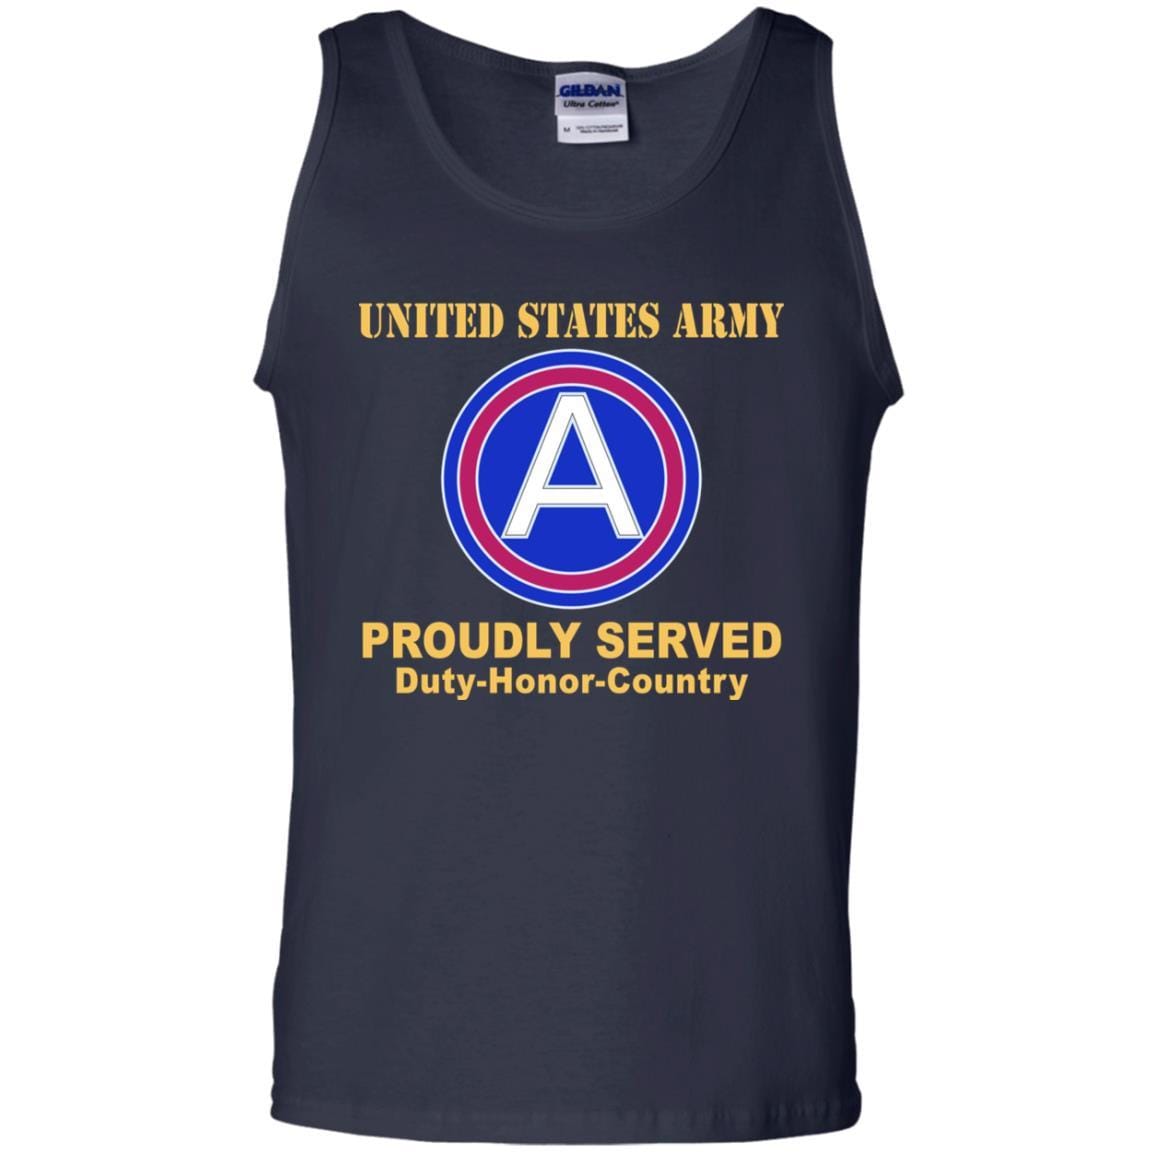 US ARMY CENTRAL CSIB- Proudly Served T-Shirt On Front For Men-TShirt-Army-Veterans Nation